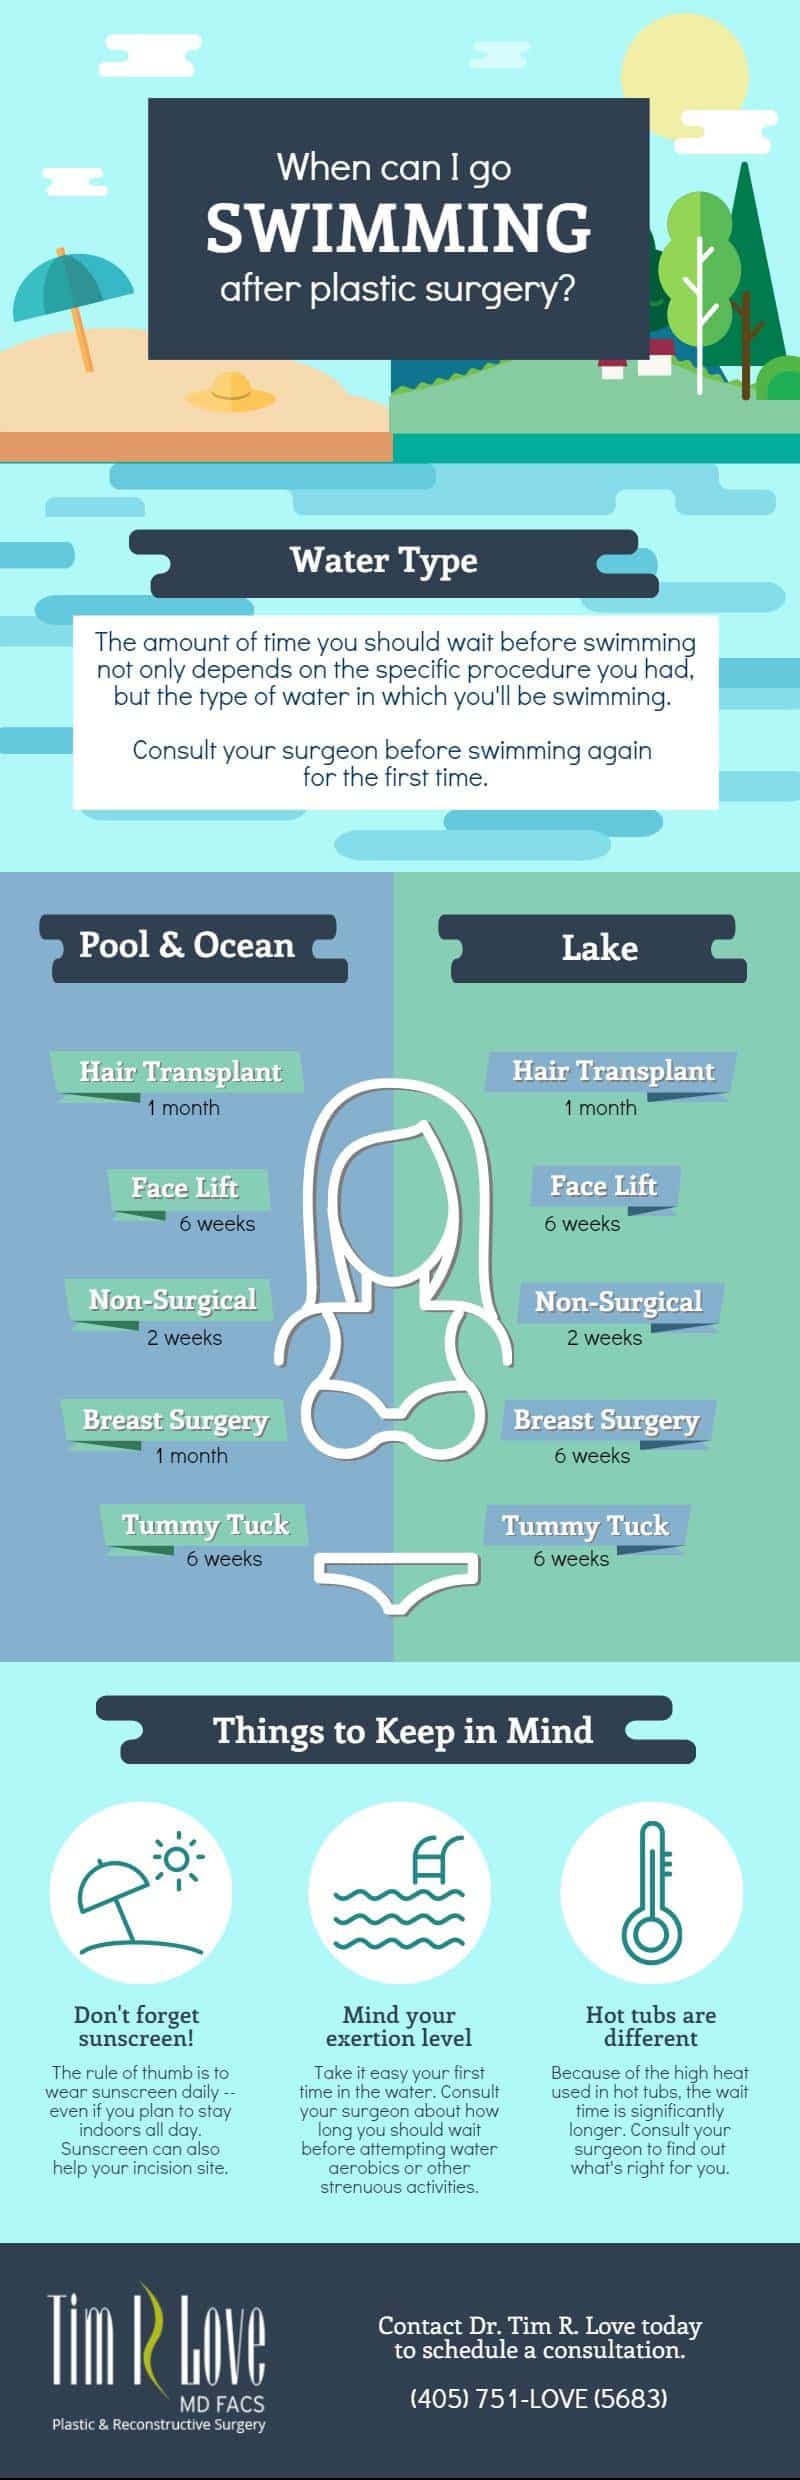 Swimming after plastic surgery infographic with wait times 